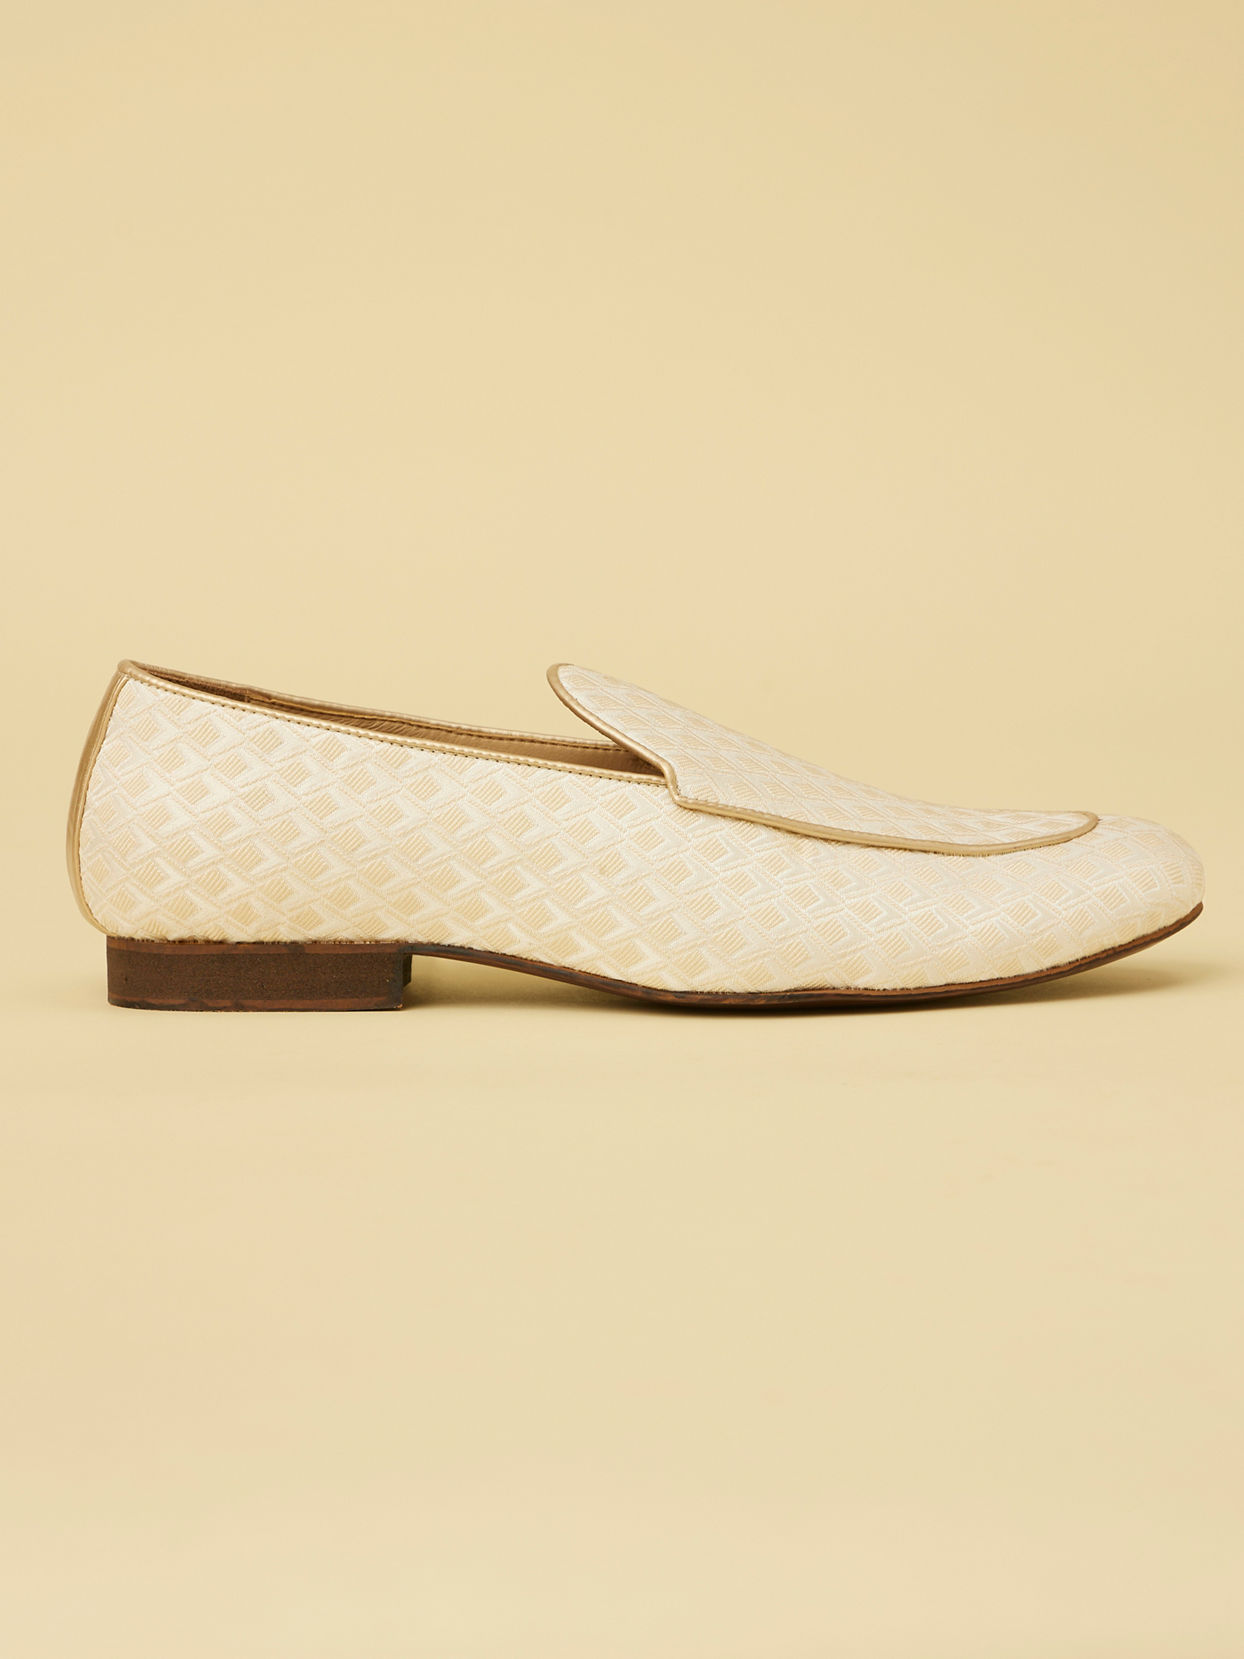 Jasmine White Diamond Patterned Loafer Style Shoes image number 3